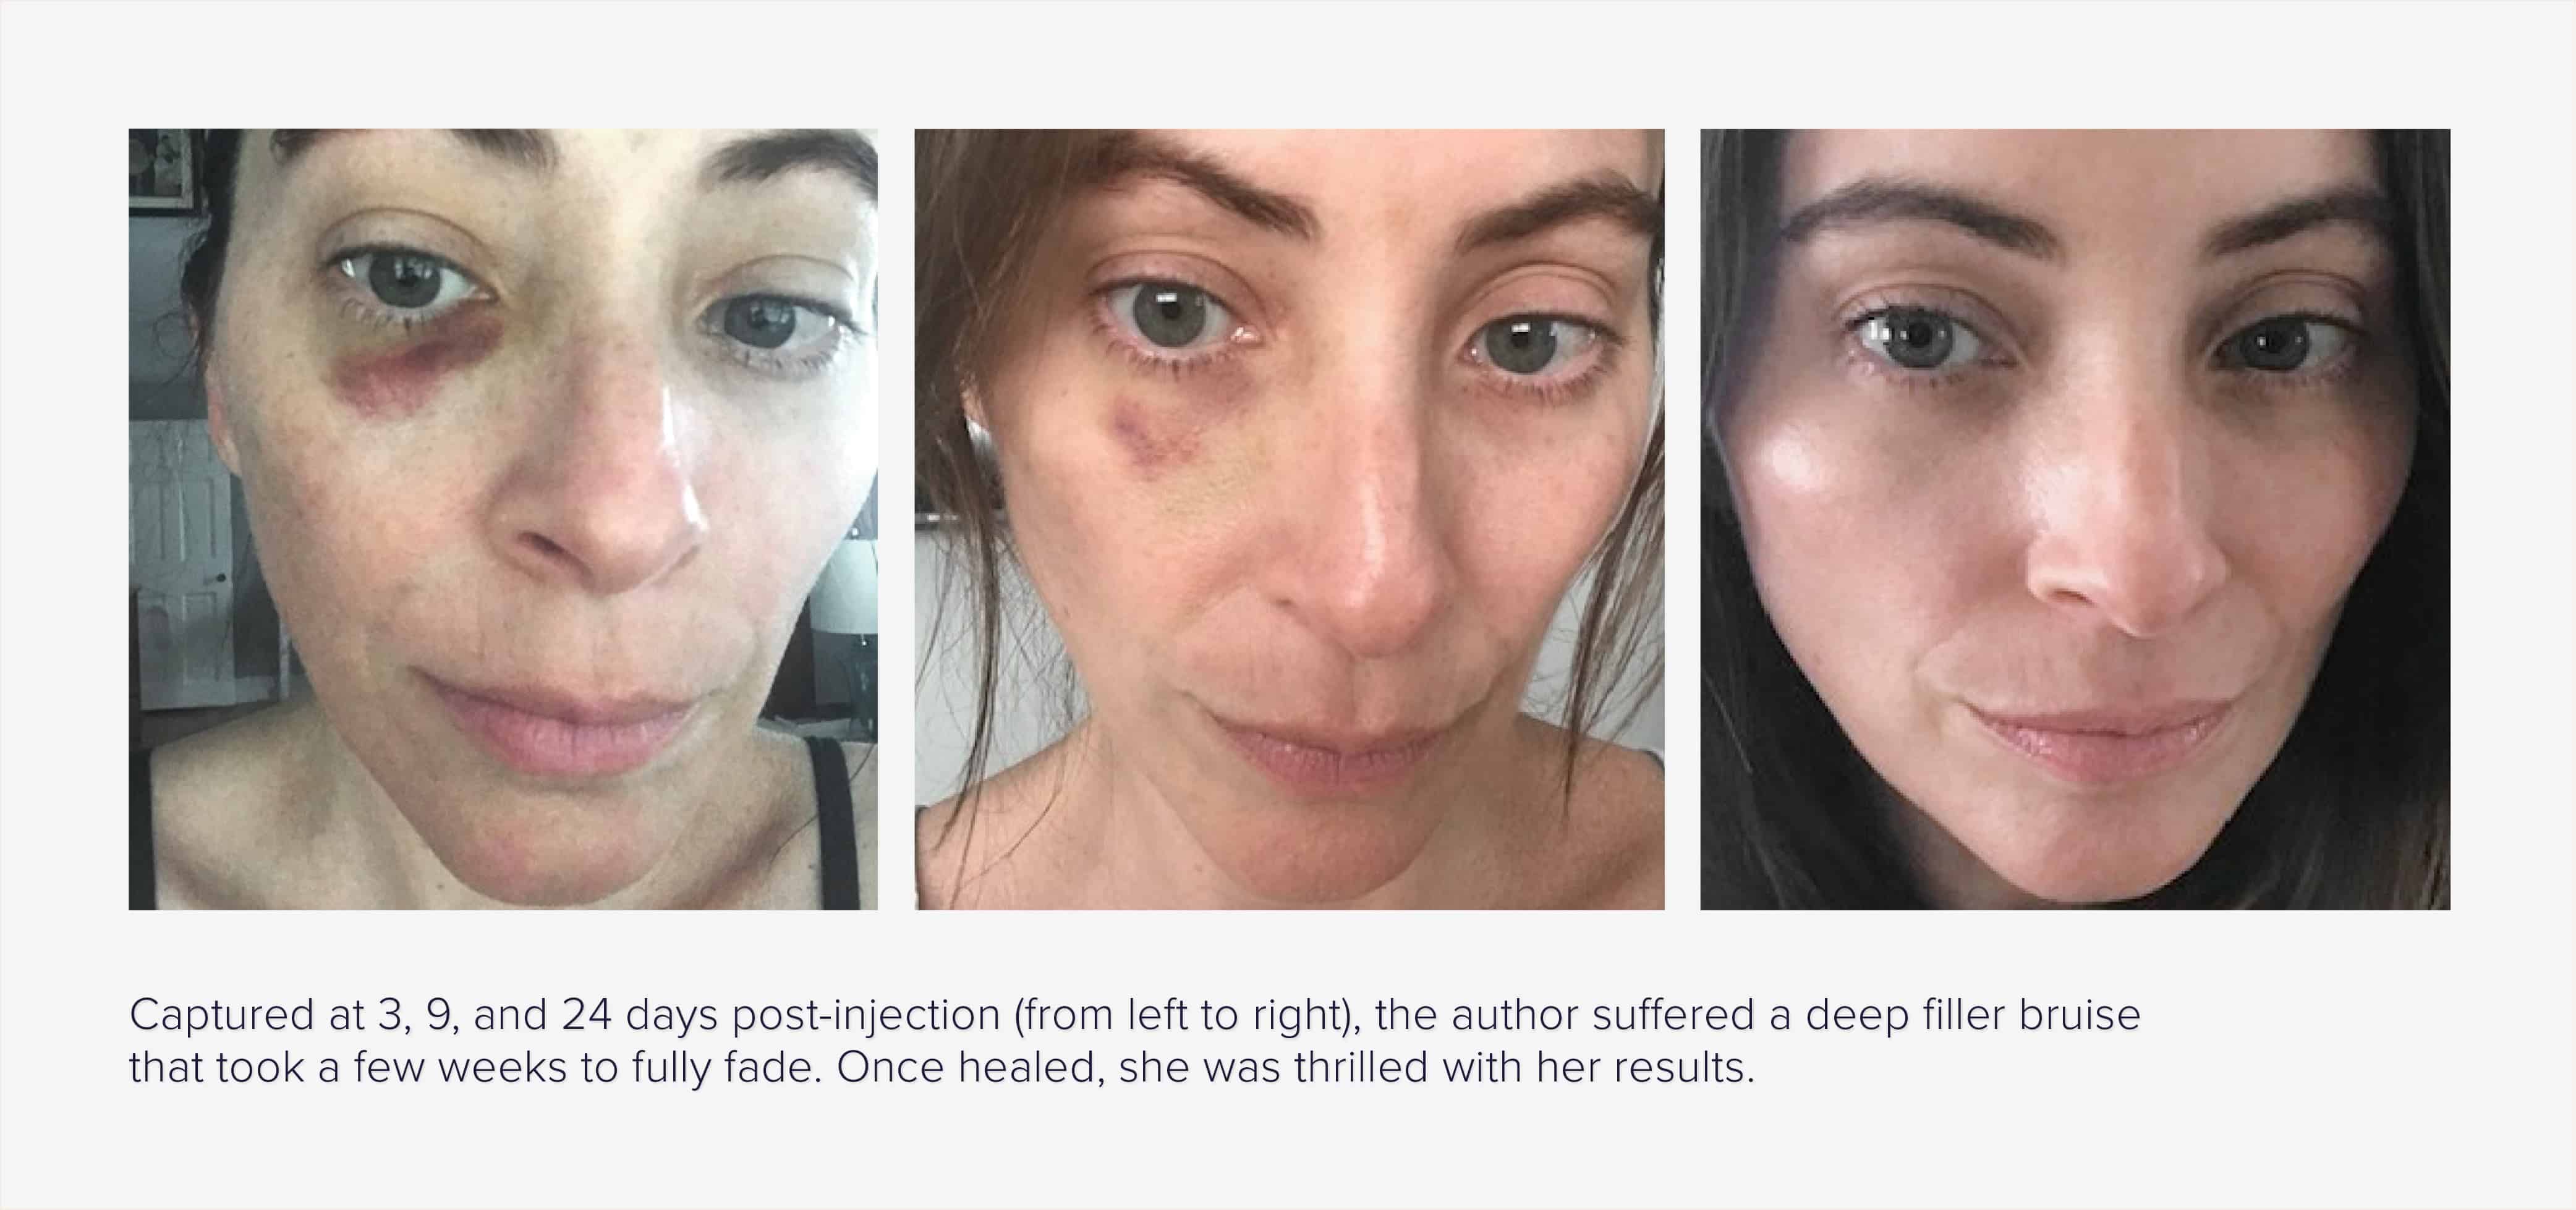 How to Cover Bruises from Filler Injections RealSelf News